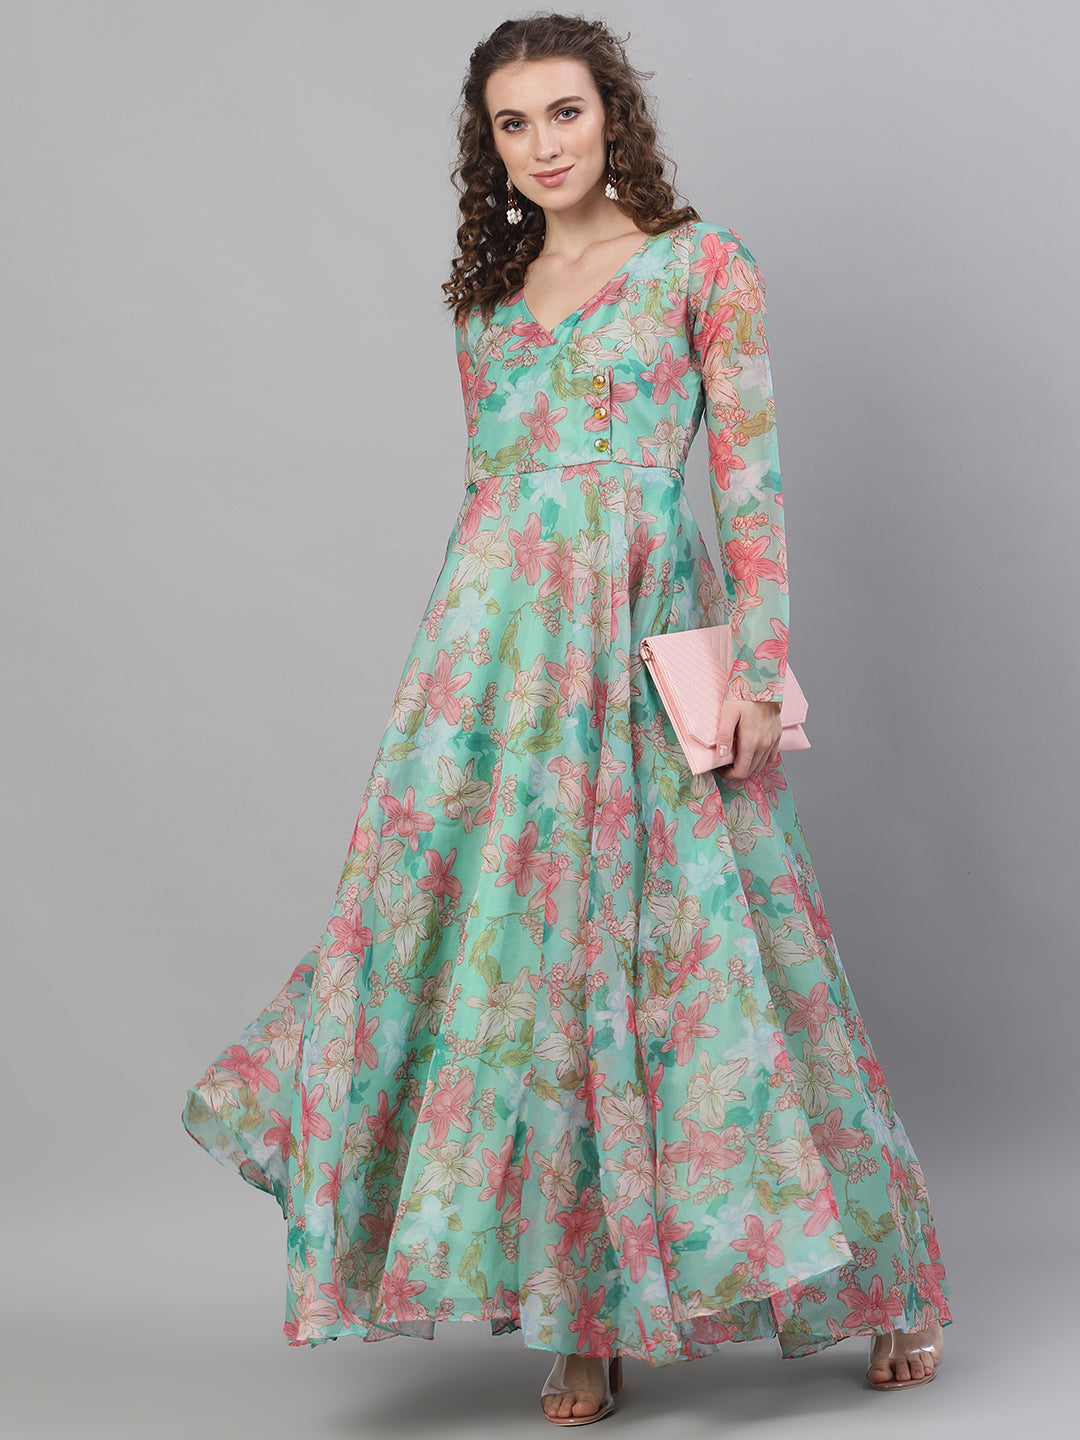 Green Floral Print Fit & Flare Dress